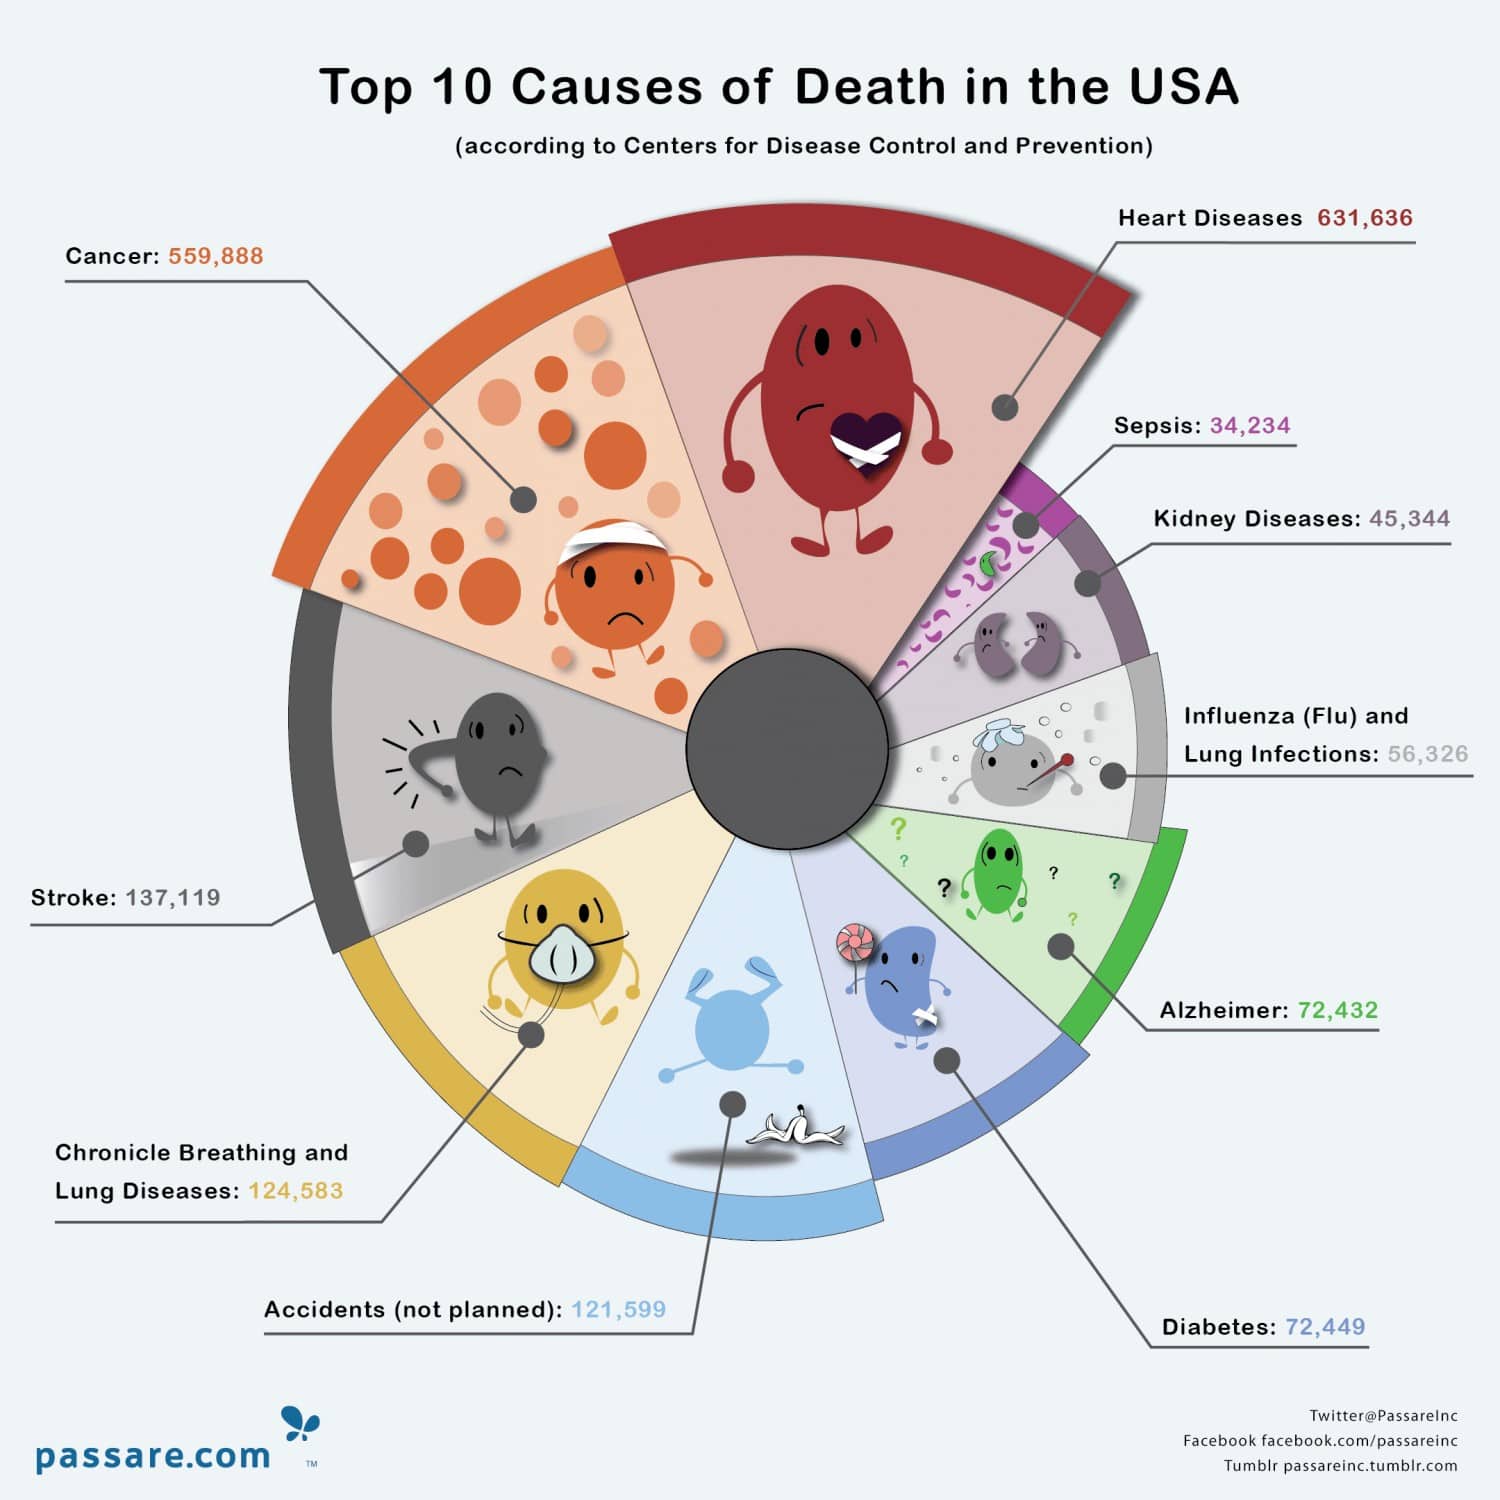 Are You at Risk? Top 10 Causes of Deaths in the USA